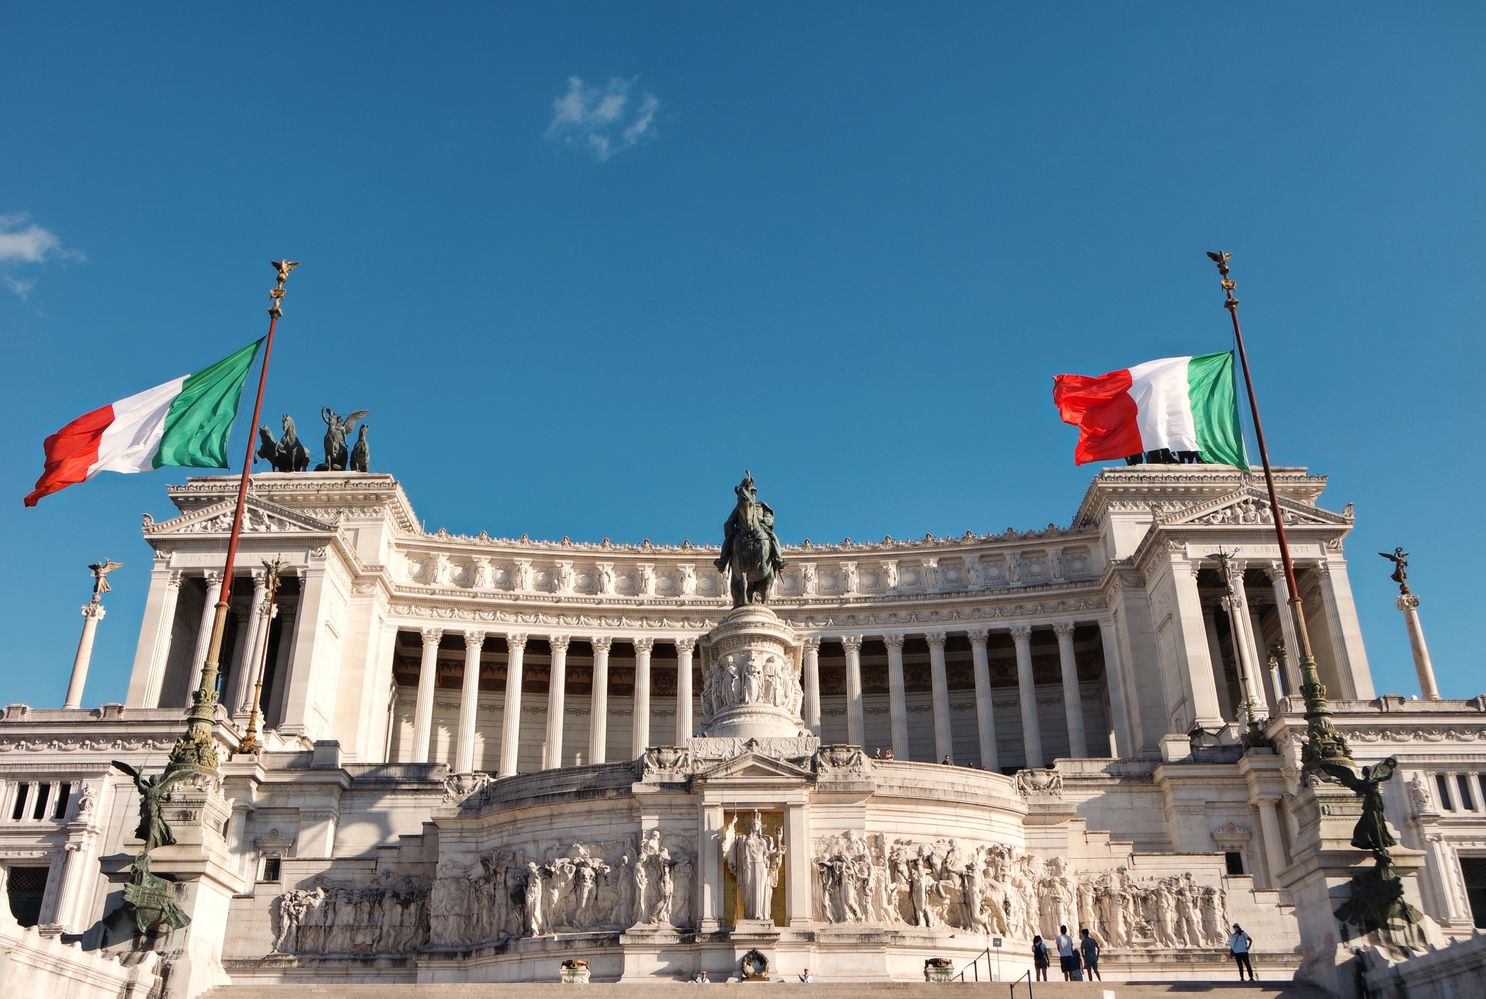 The Vittoriano, symbol of the unification of Italy, in Piazza Venezia.